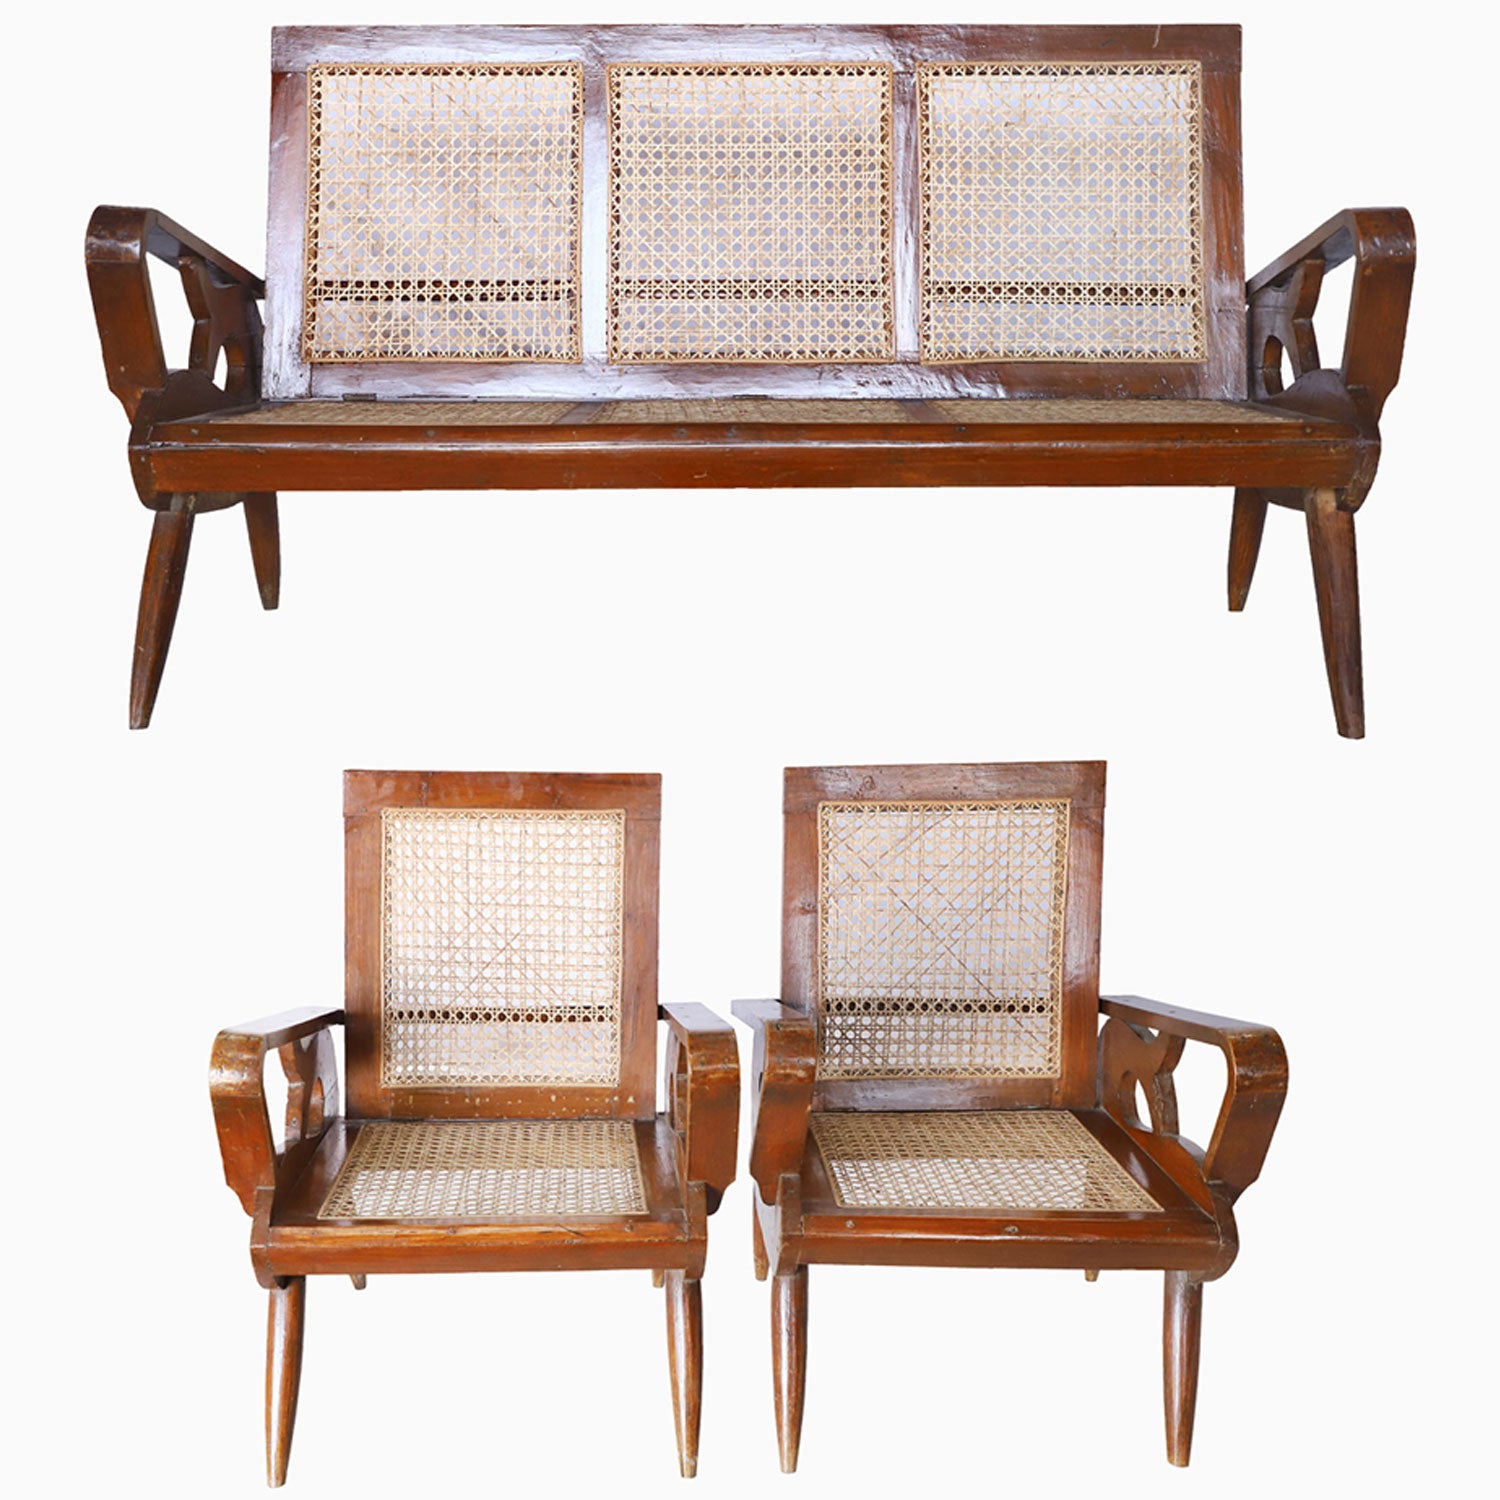 Cane Seating Set With Curved Arms Main